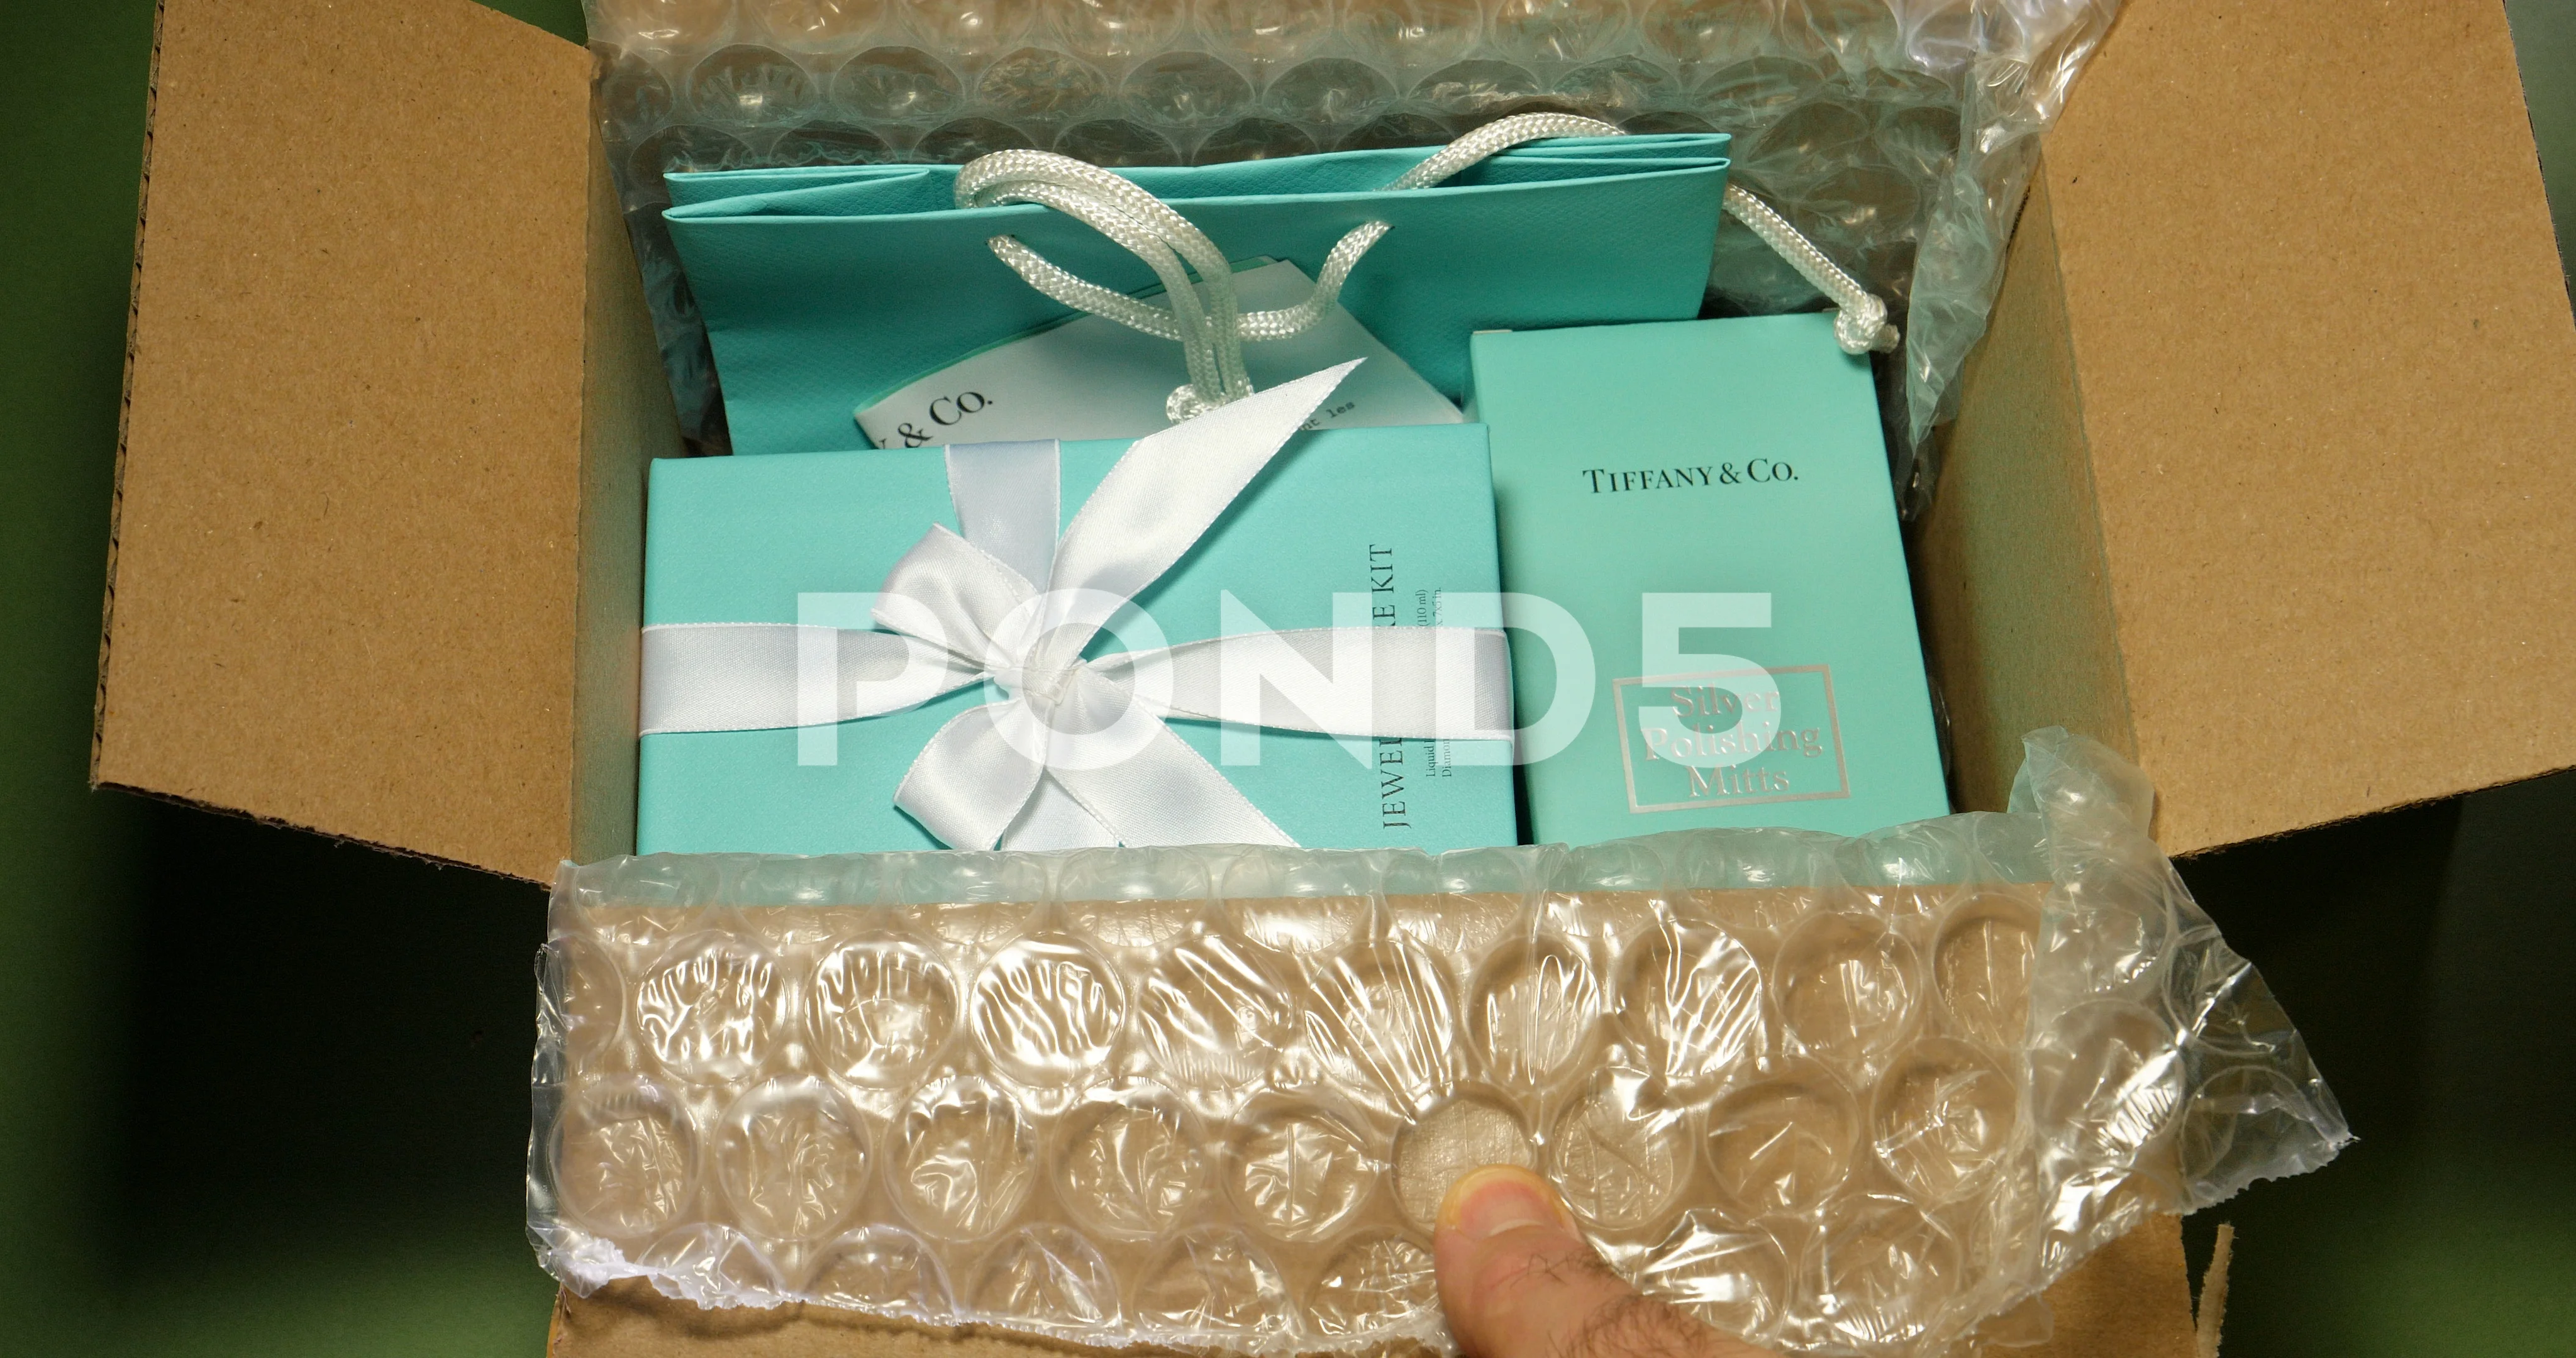 The New Tiffany, Unboxed - The New York Times